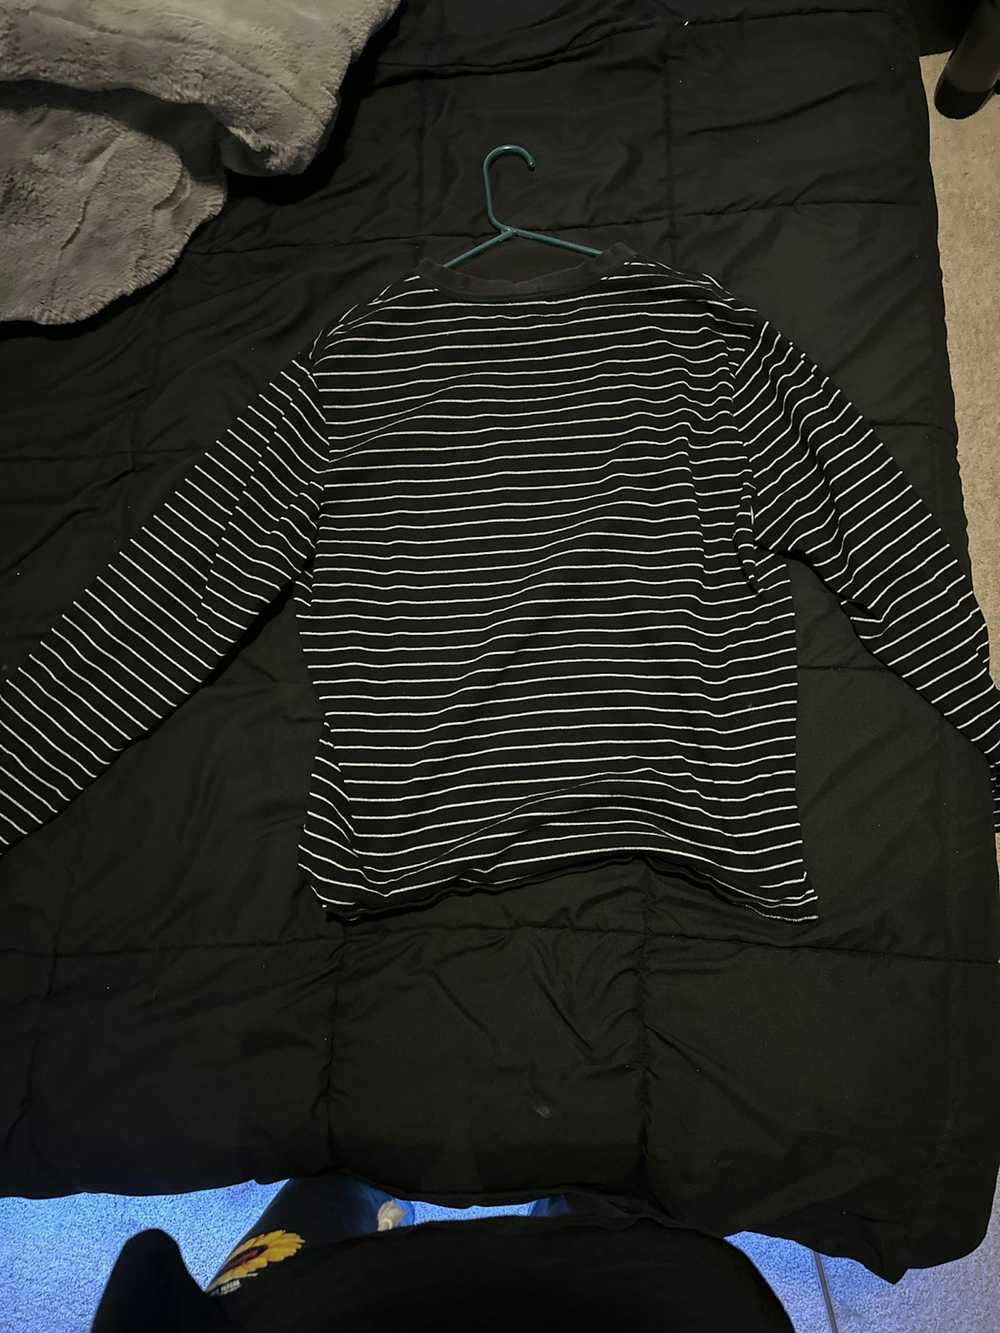 Guess Guess jeans reflective shirt - image 3